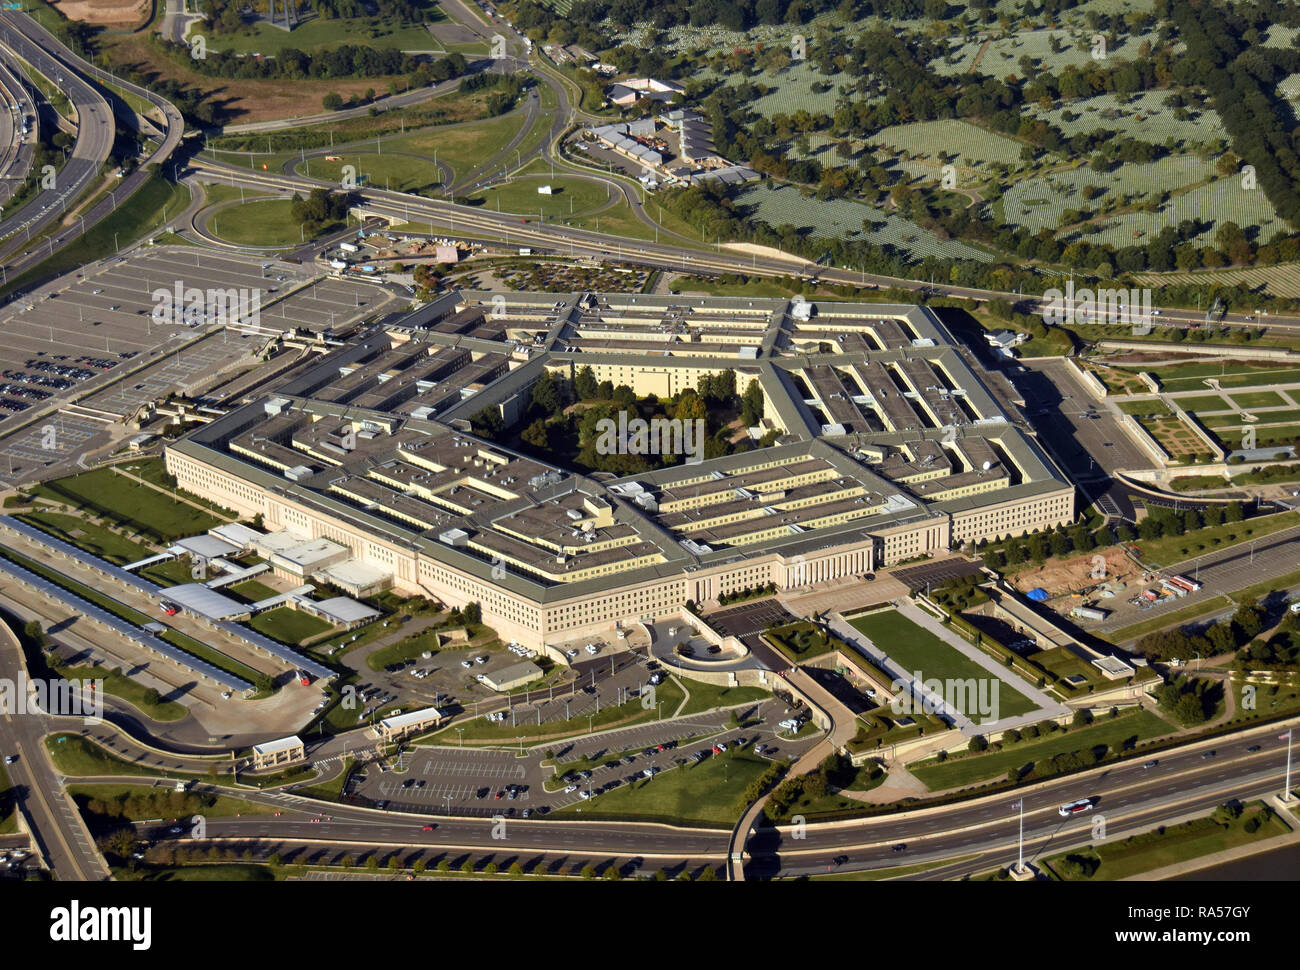 US Pentagon in Washington DC building looking down aerial view from above Stock Photo